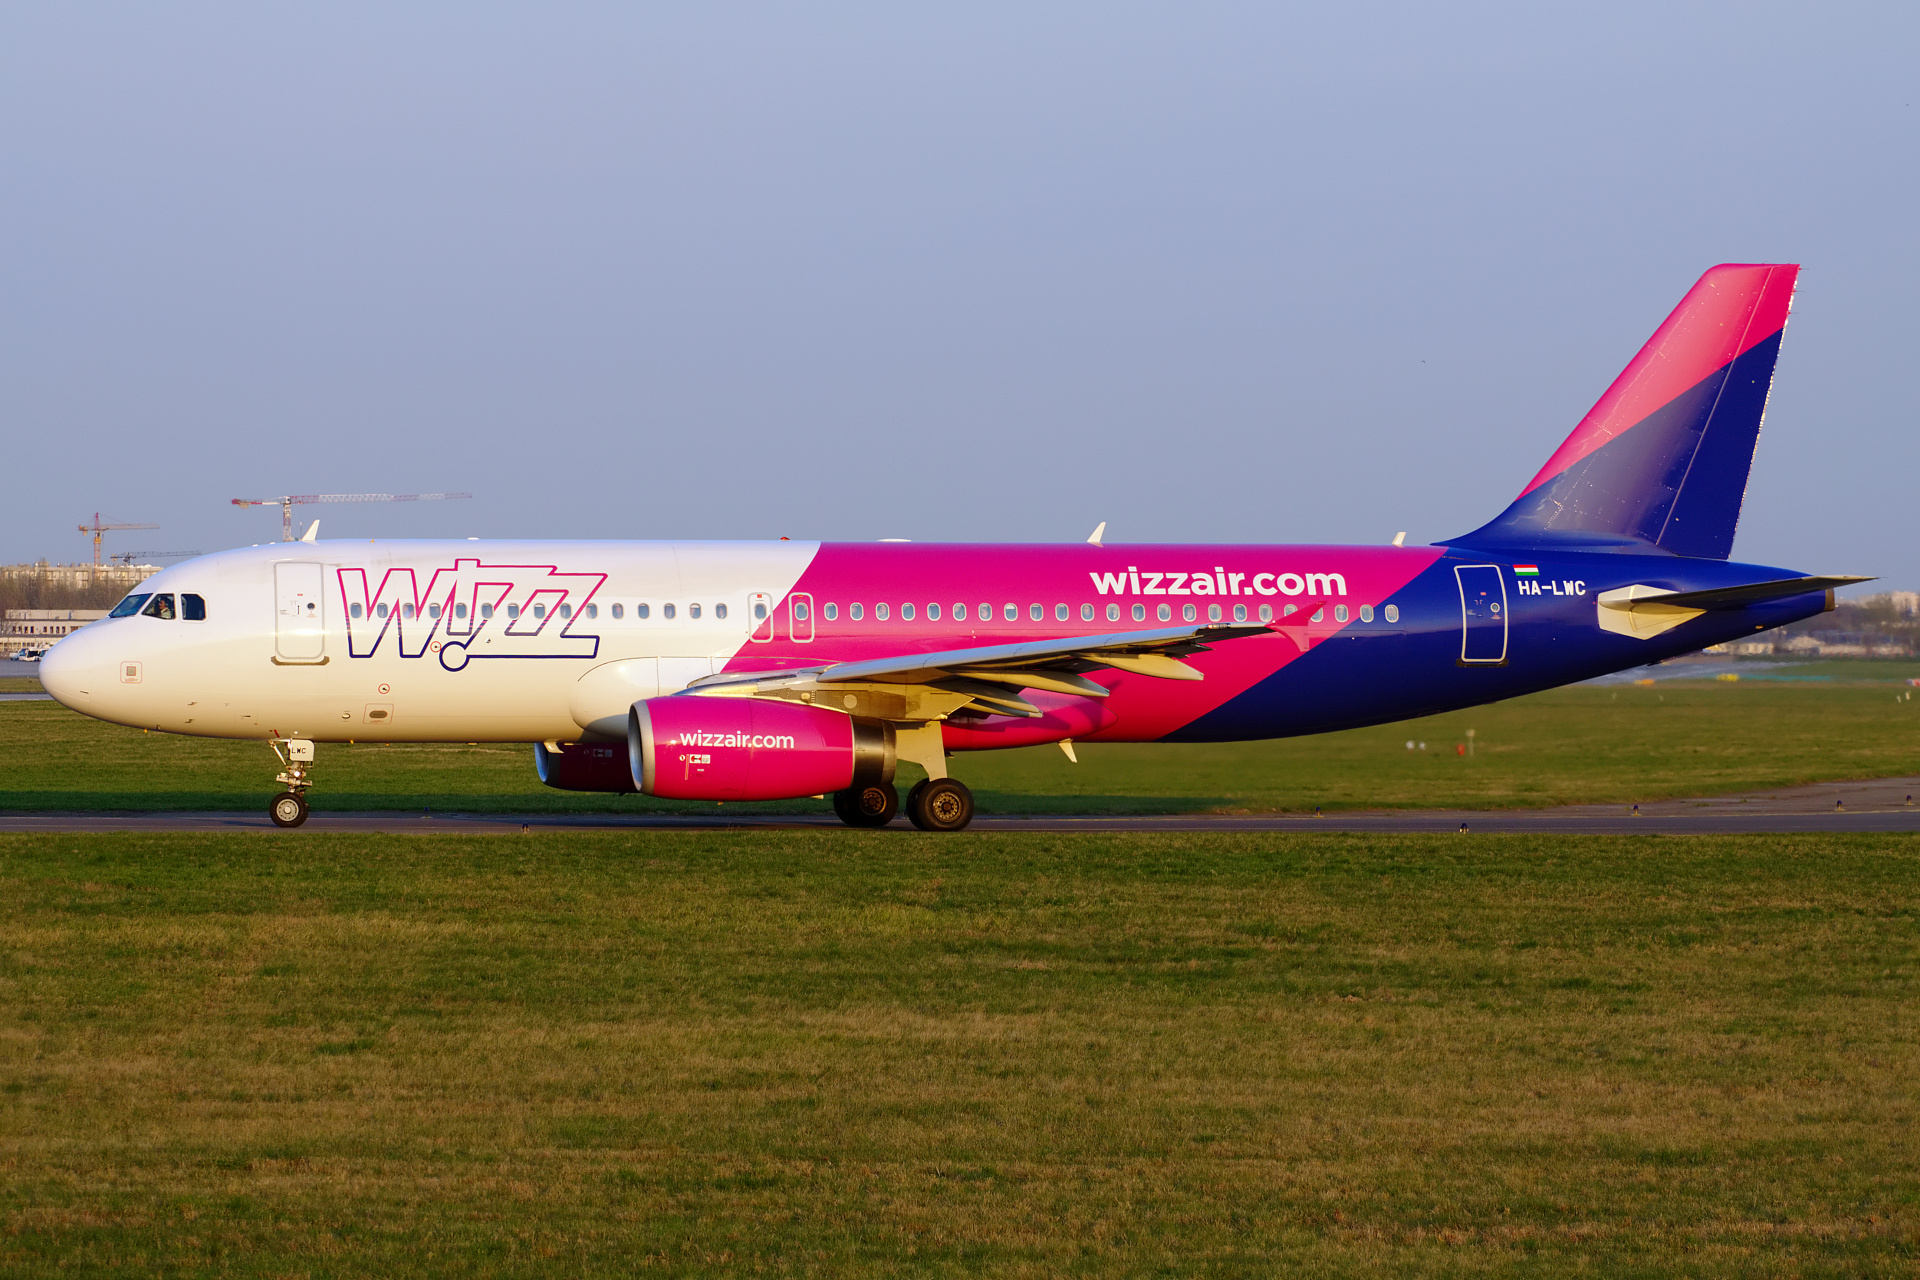 HA-LWC (new livery) (Aircraft » EPWA Spotting » Airbus A320-200 » Wizz Air)